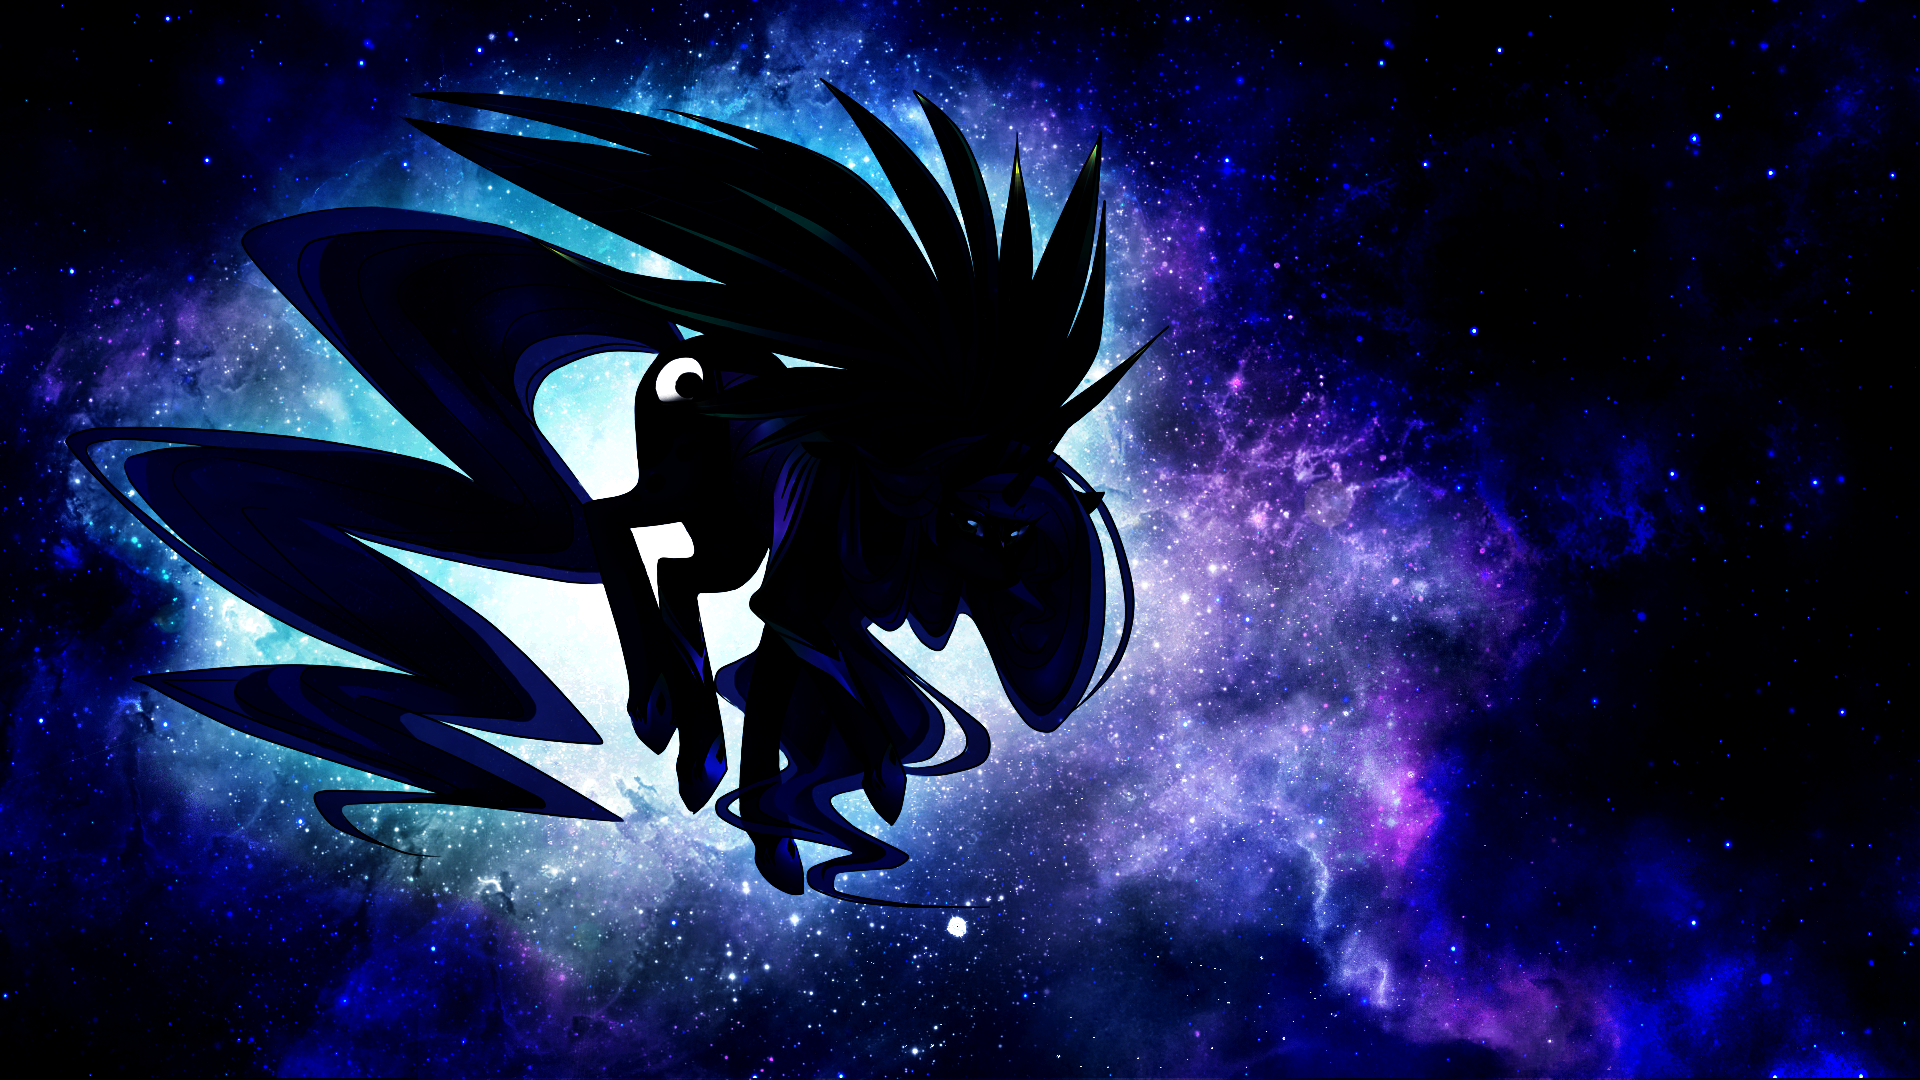 MScoot- Princess Luna (EP's Eternal Darkness Edit) by Emper0rPenguin and MScootaloo